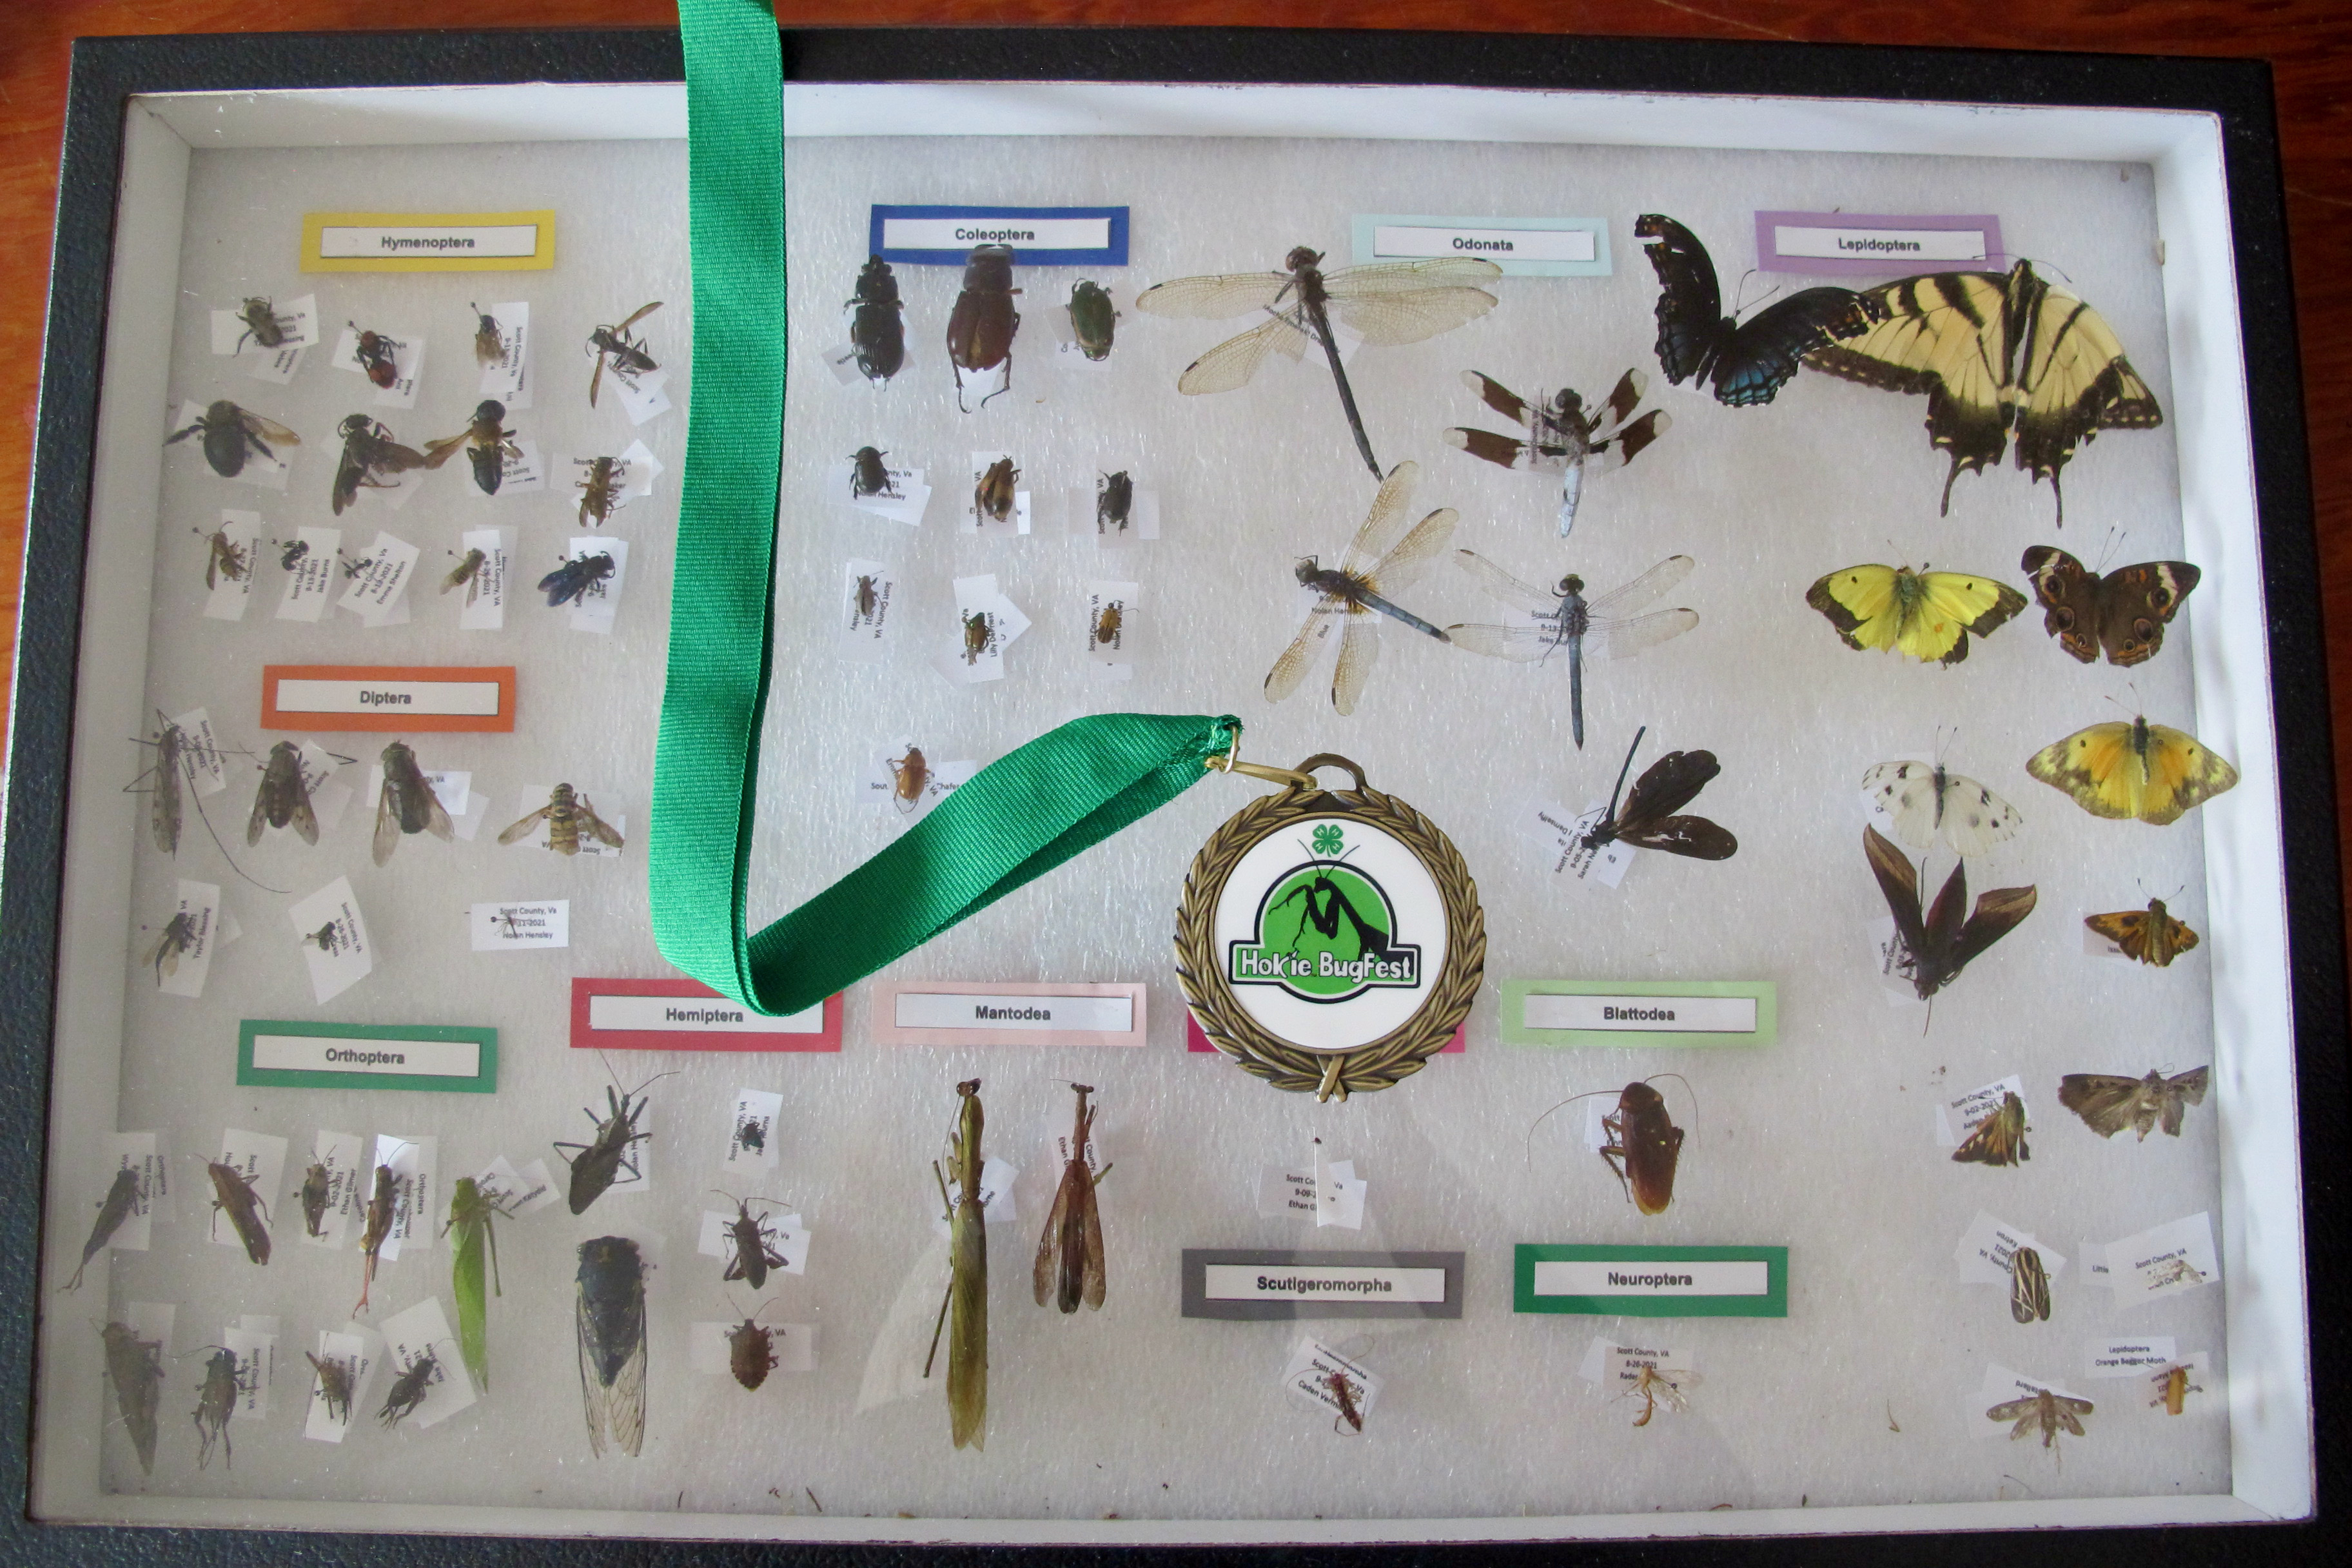 4-H Insect Collection Contest Winner at the 2021 Hokie BugFest.